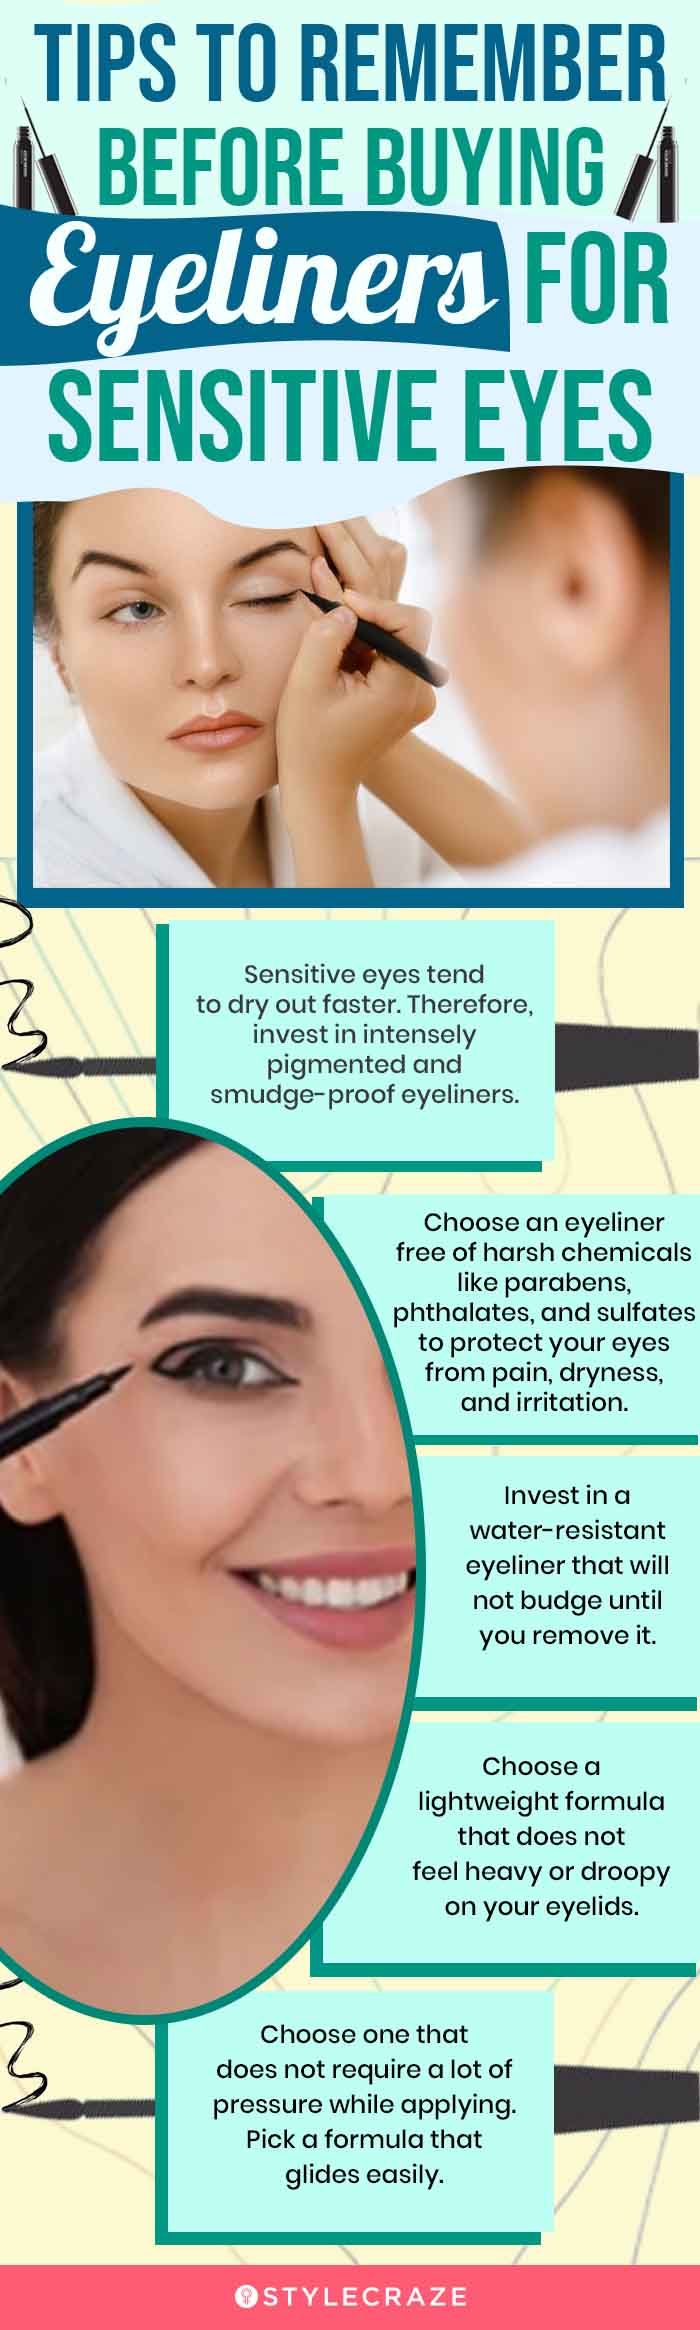 Tips To Remember Before Buying Eyeliners For Sensitive Eyes (infographic)